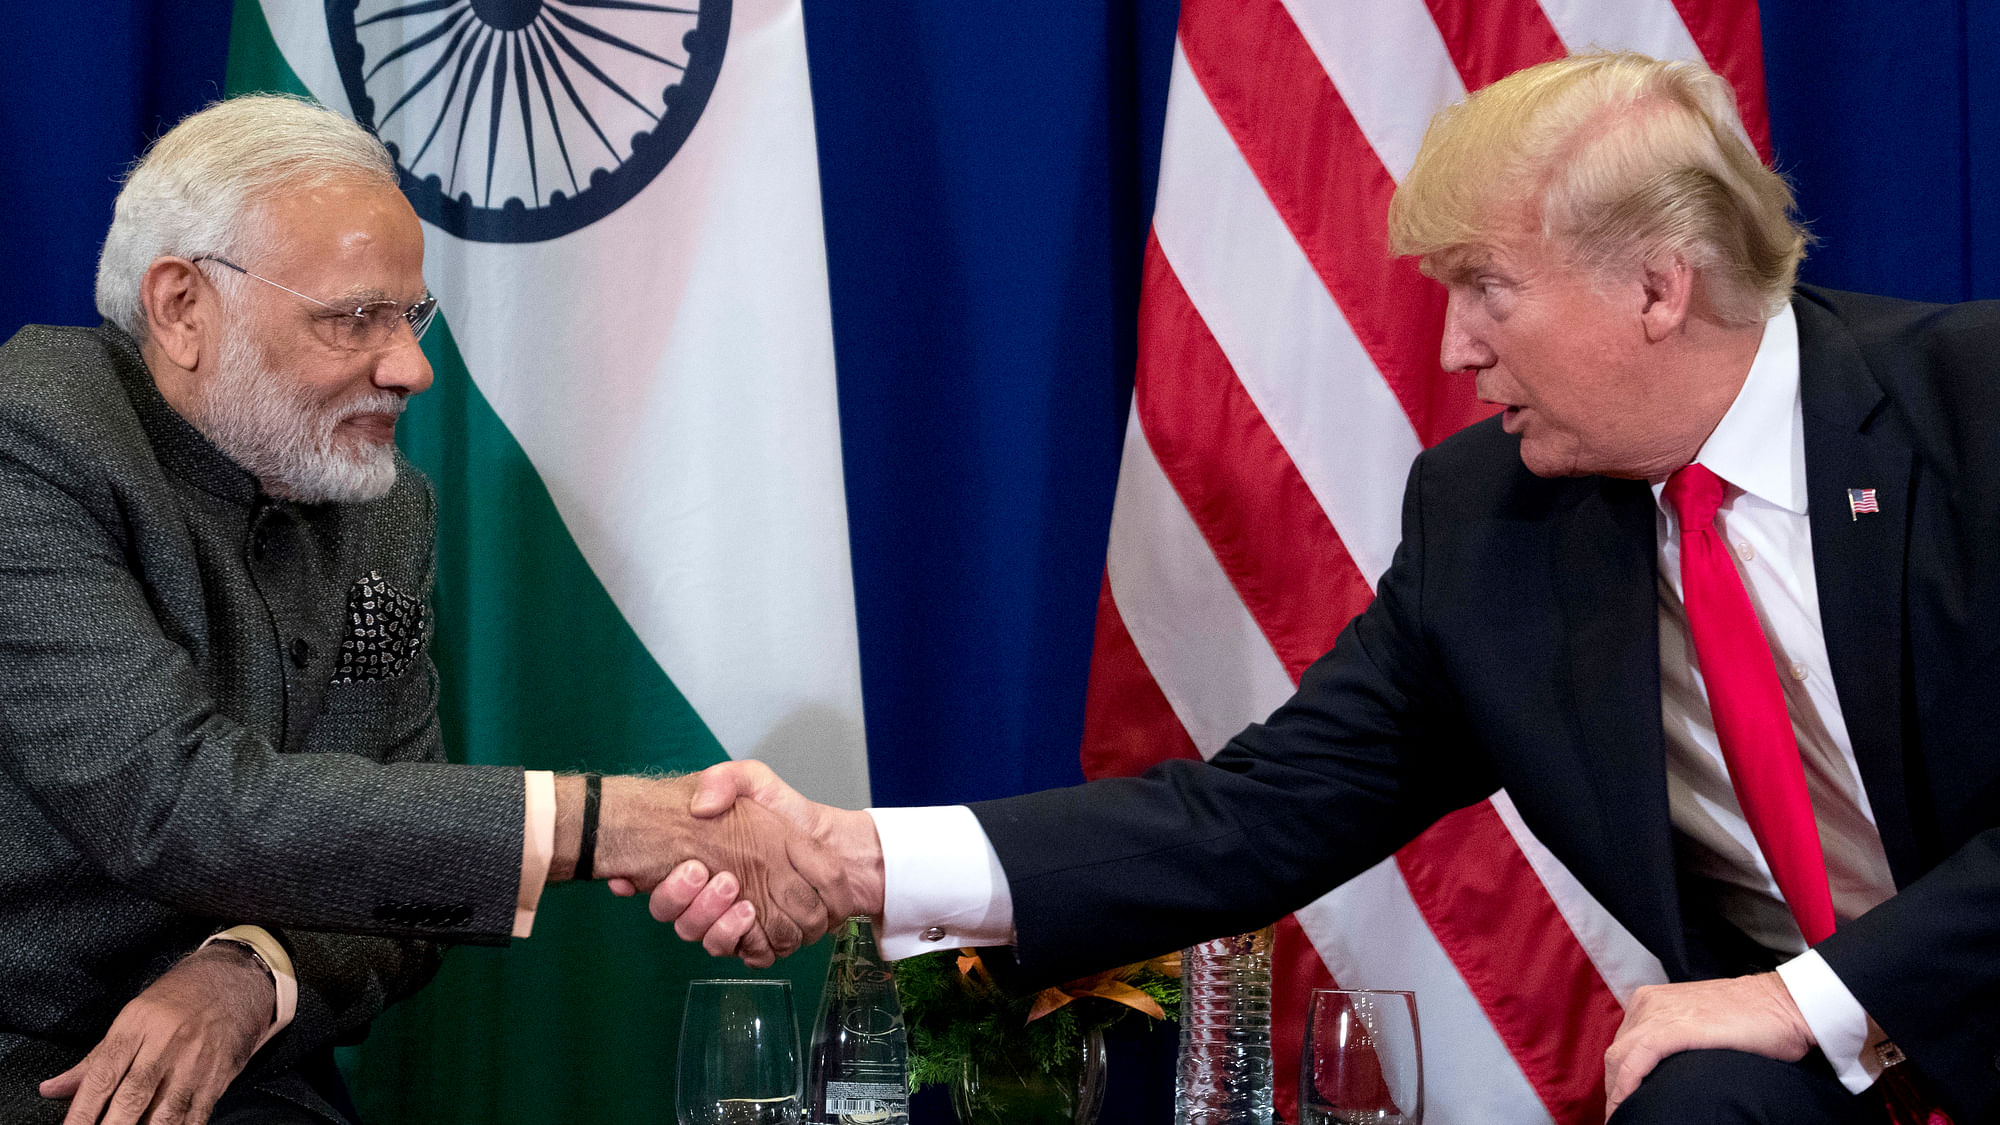 US President Donald Trump and PM Narendra Modi held a bilateral meeting during the ASEAN Summit on Monday, 13 November.